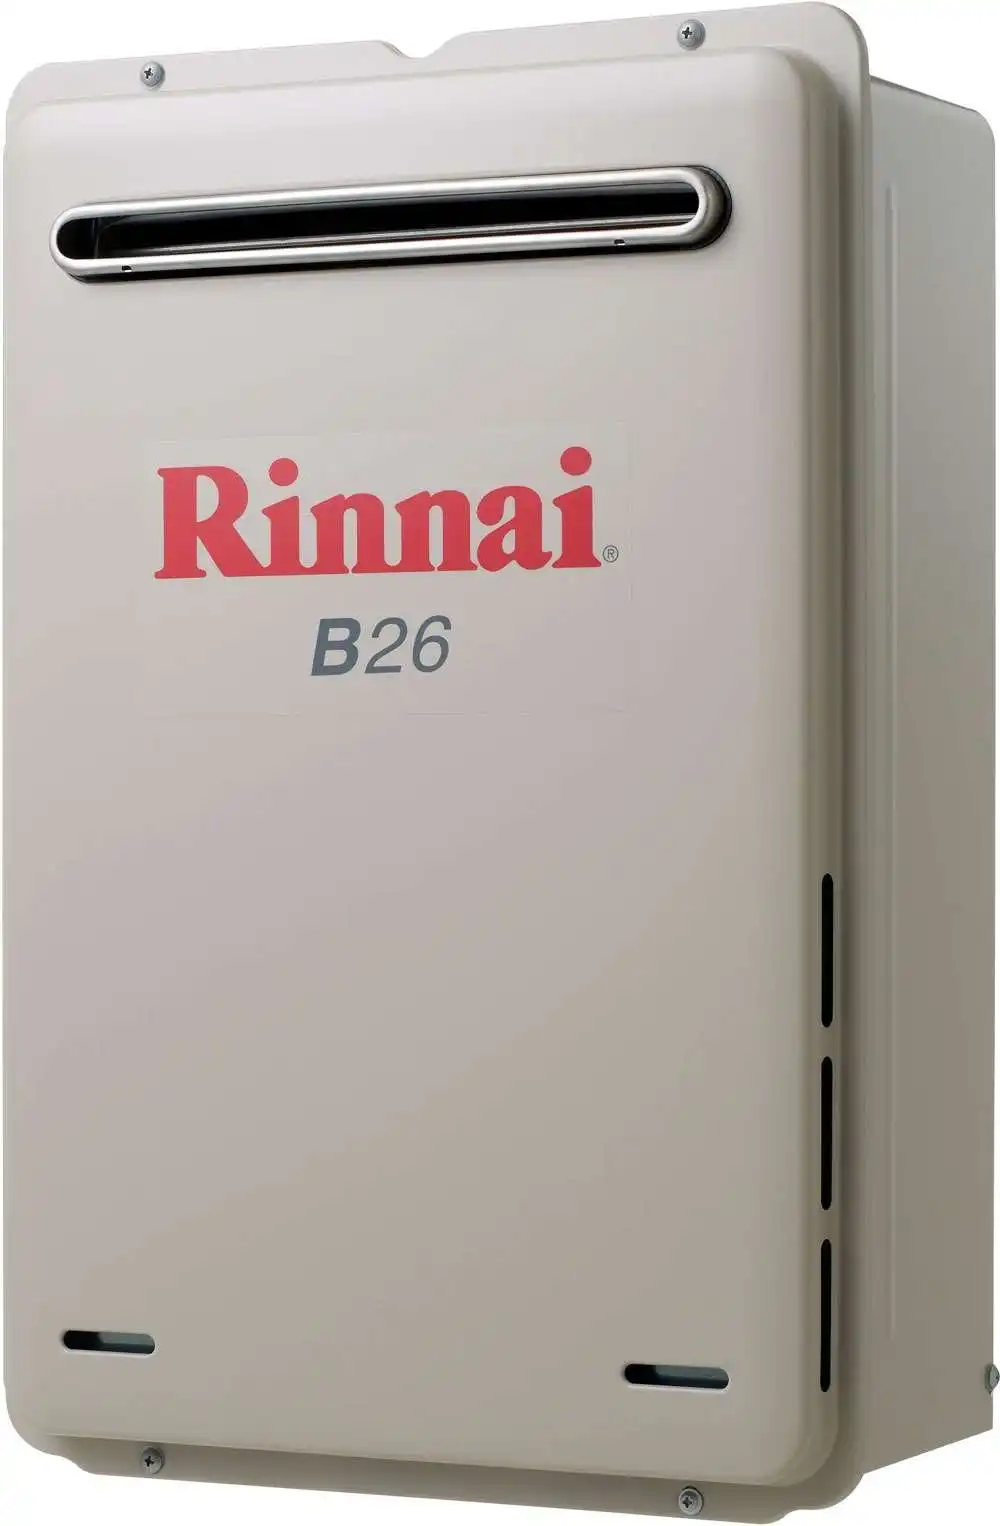 Rinnai Builders 60oC 26L Instant Hot Water System B26N60A B26 *NATURAL GAS*